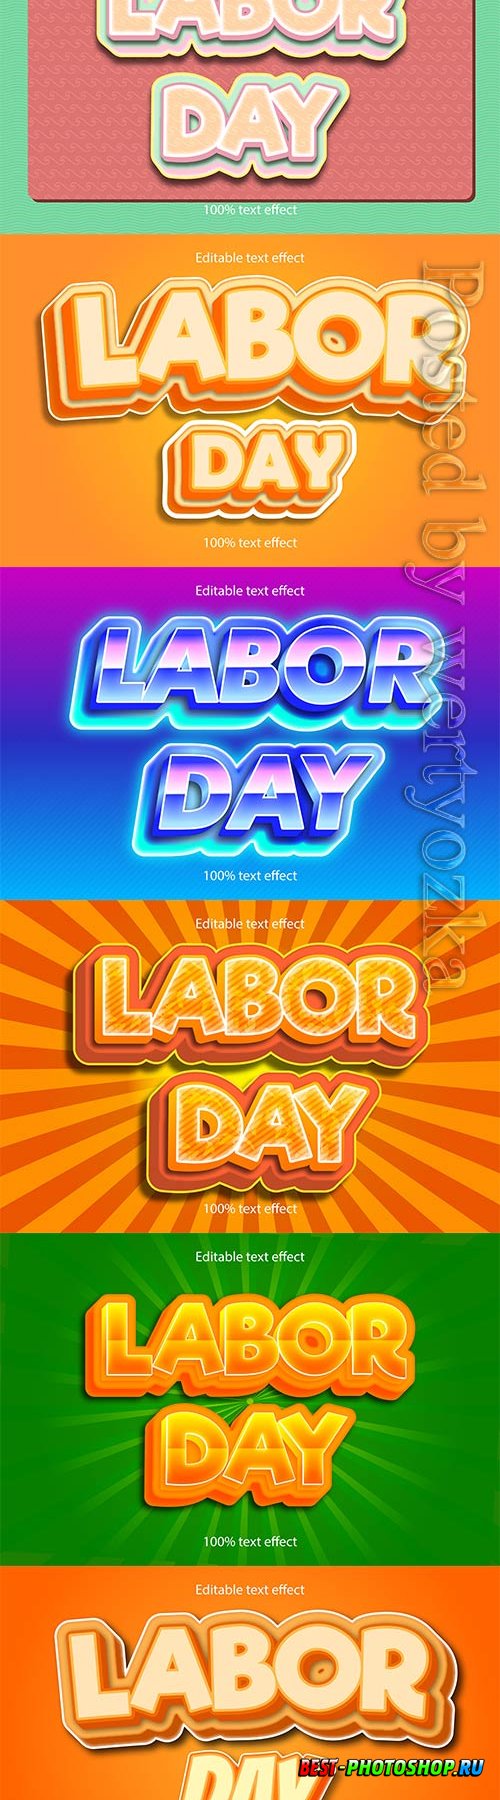 Labor day editable text effect vol 6